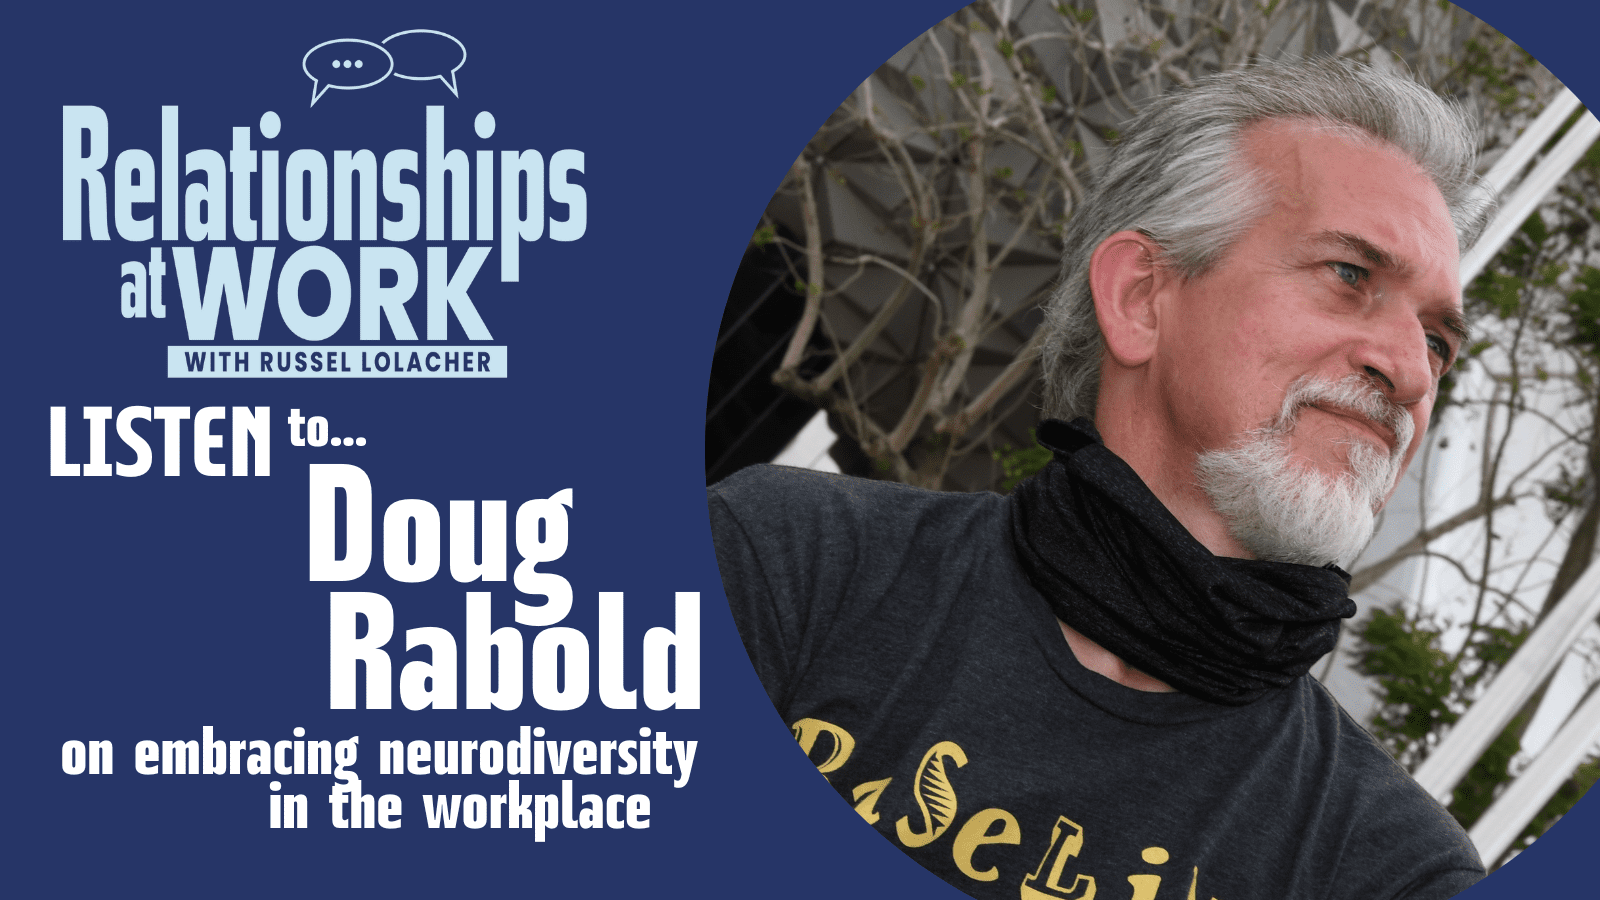 Doug Rabold Helps Us Understand and Embrace Neurodiversity in the Workplace